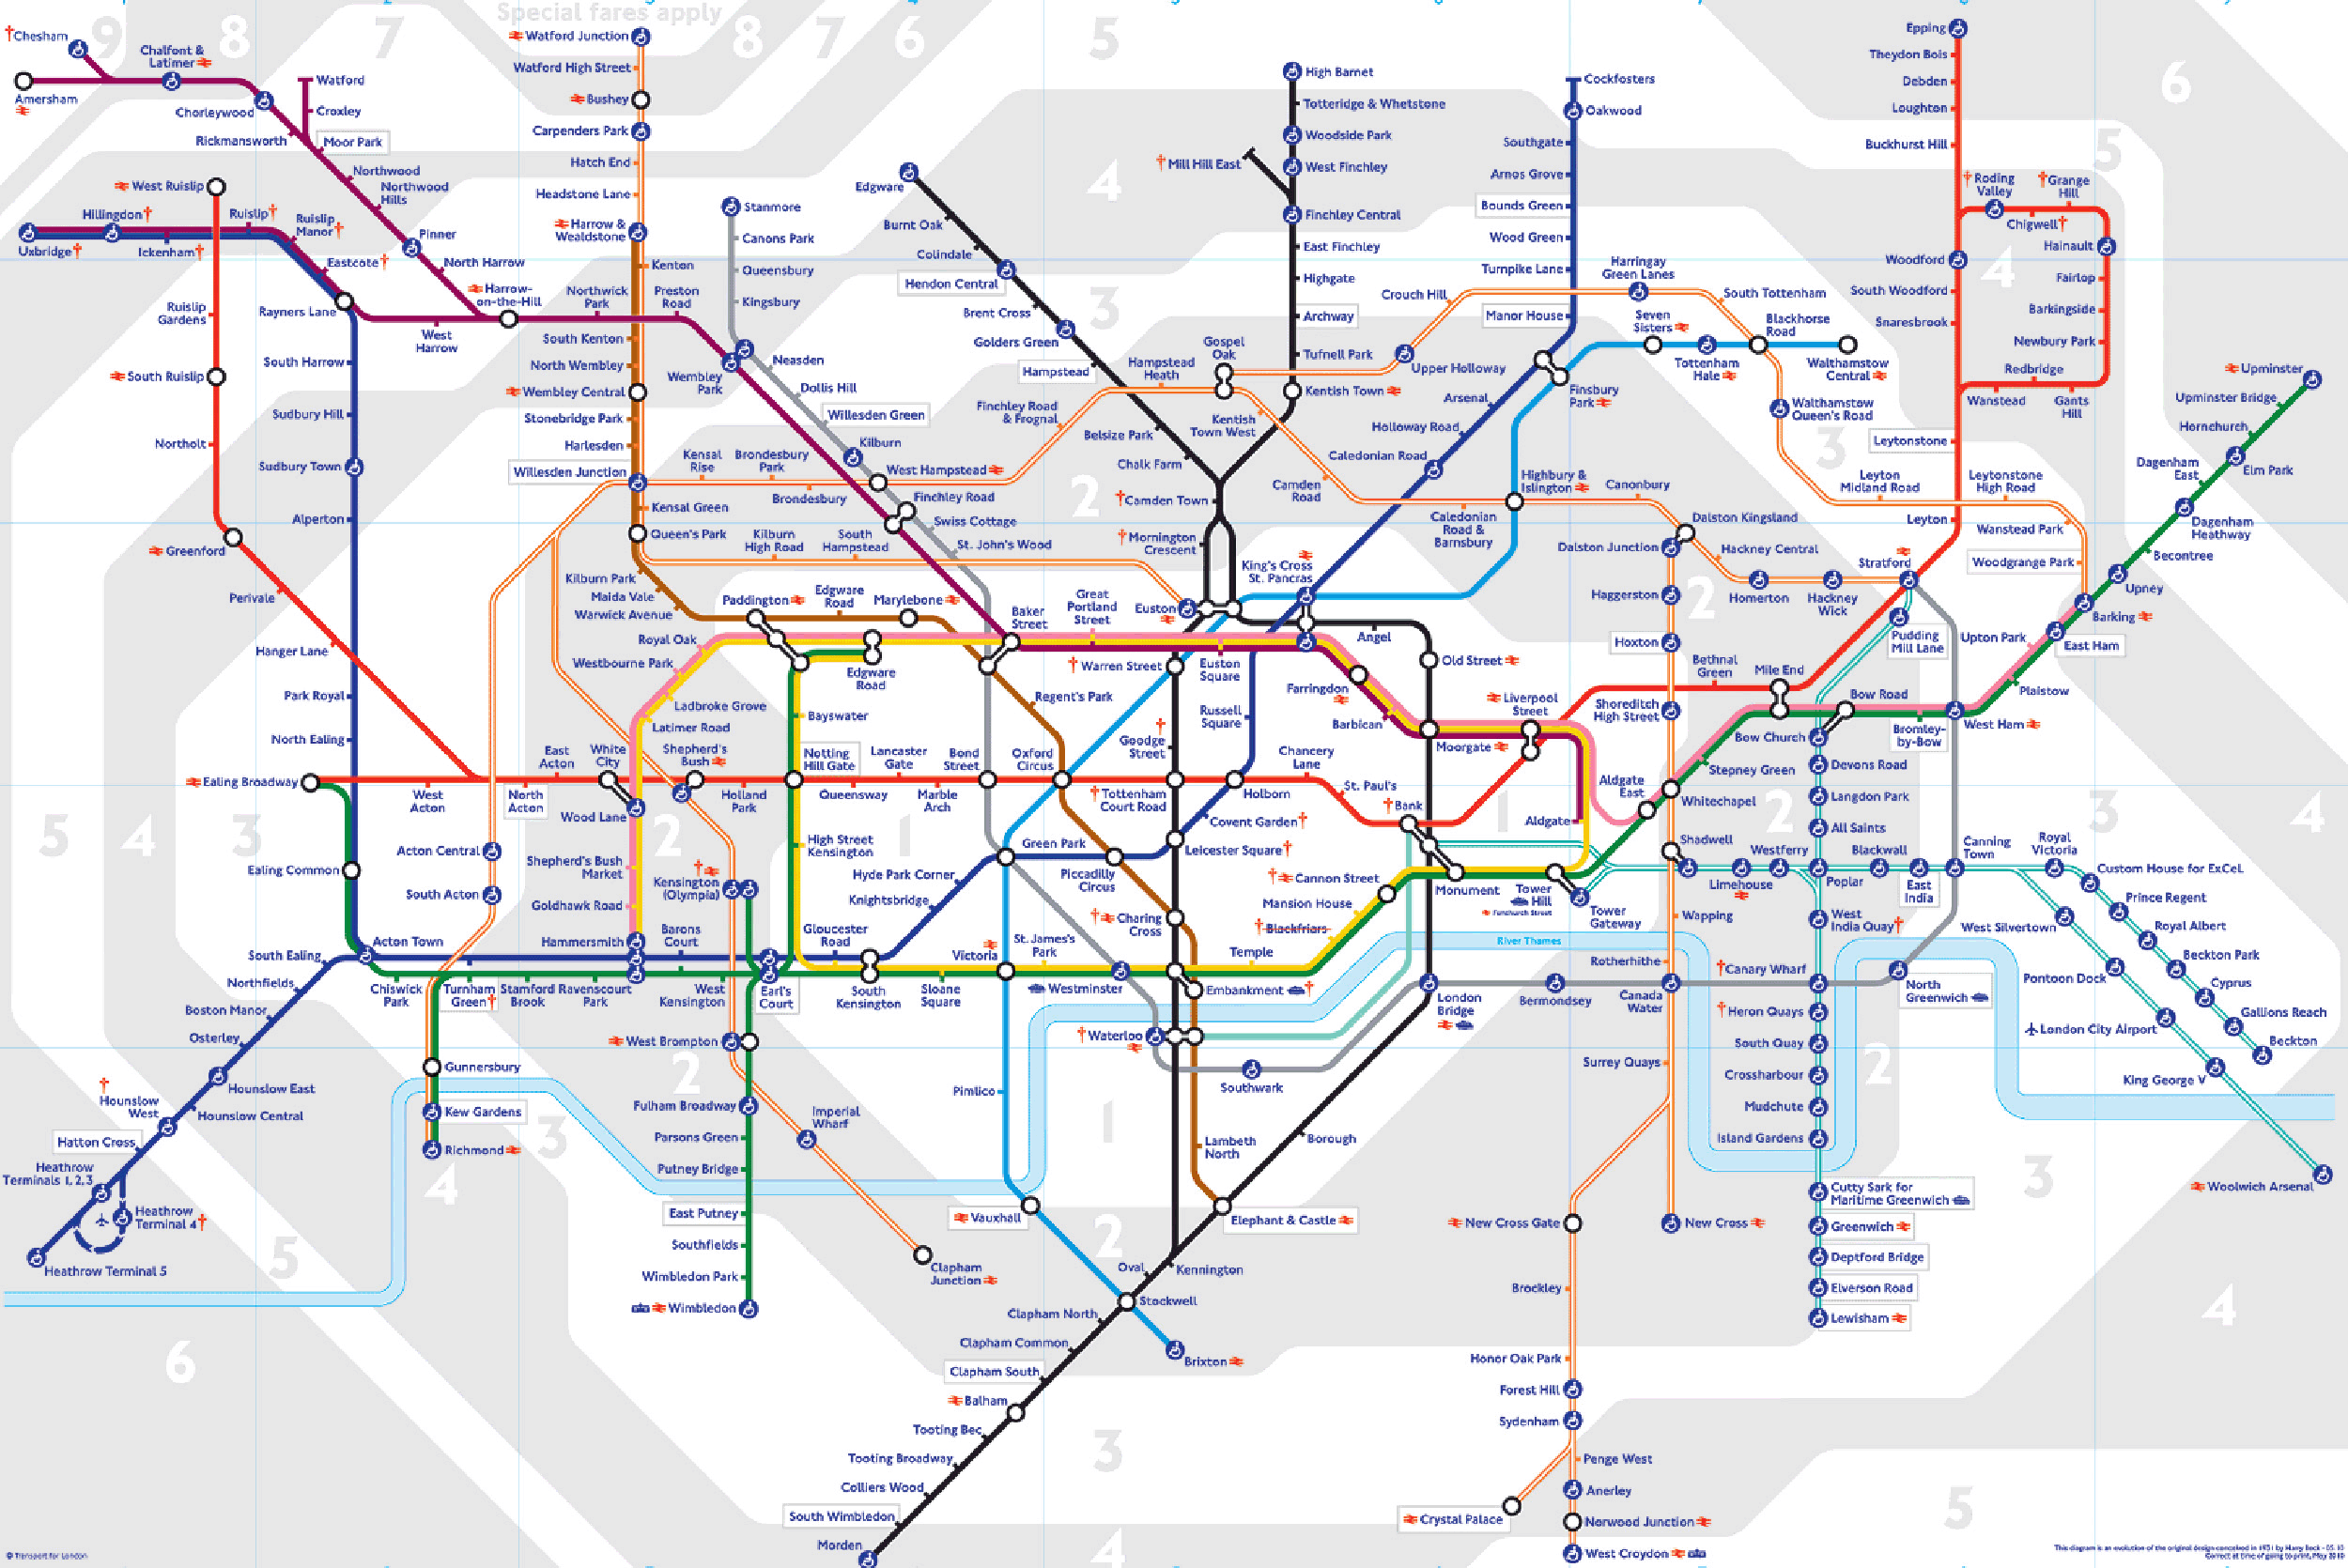 london tube map with attractions